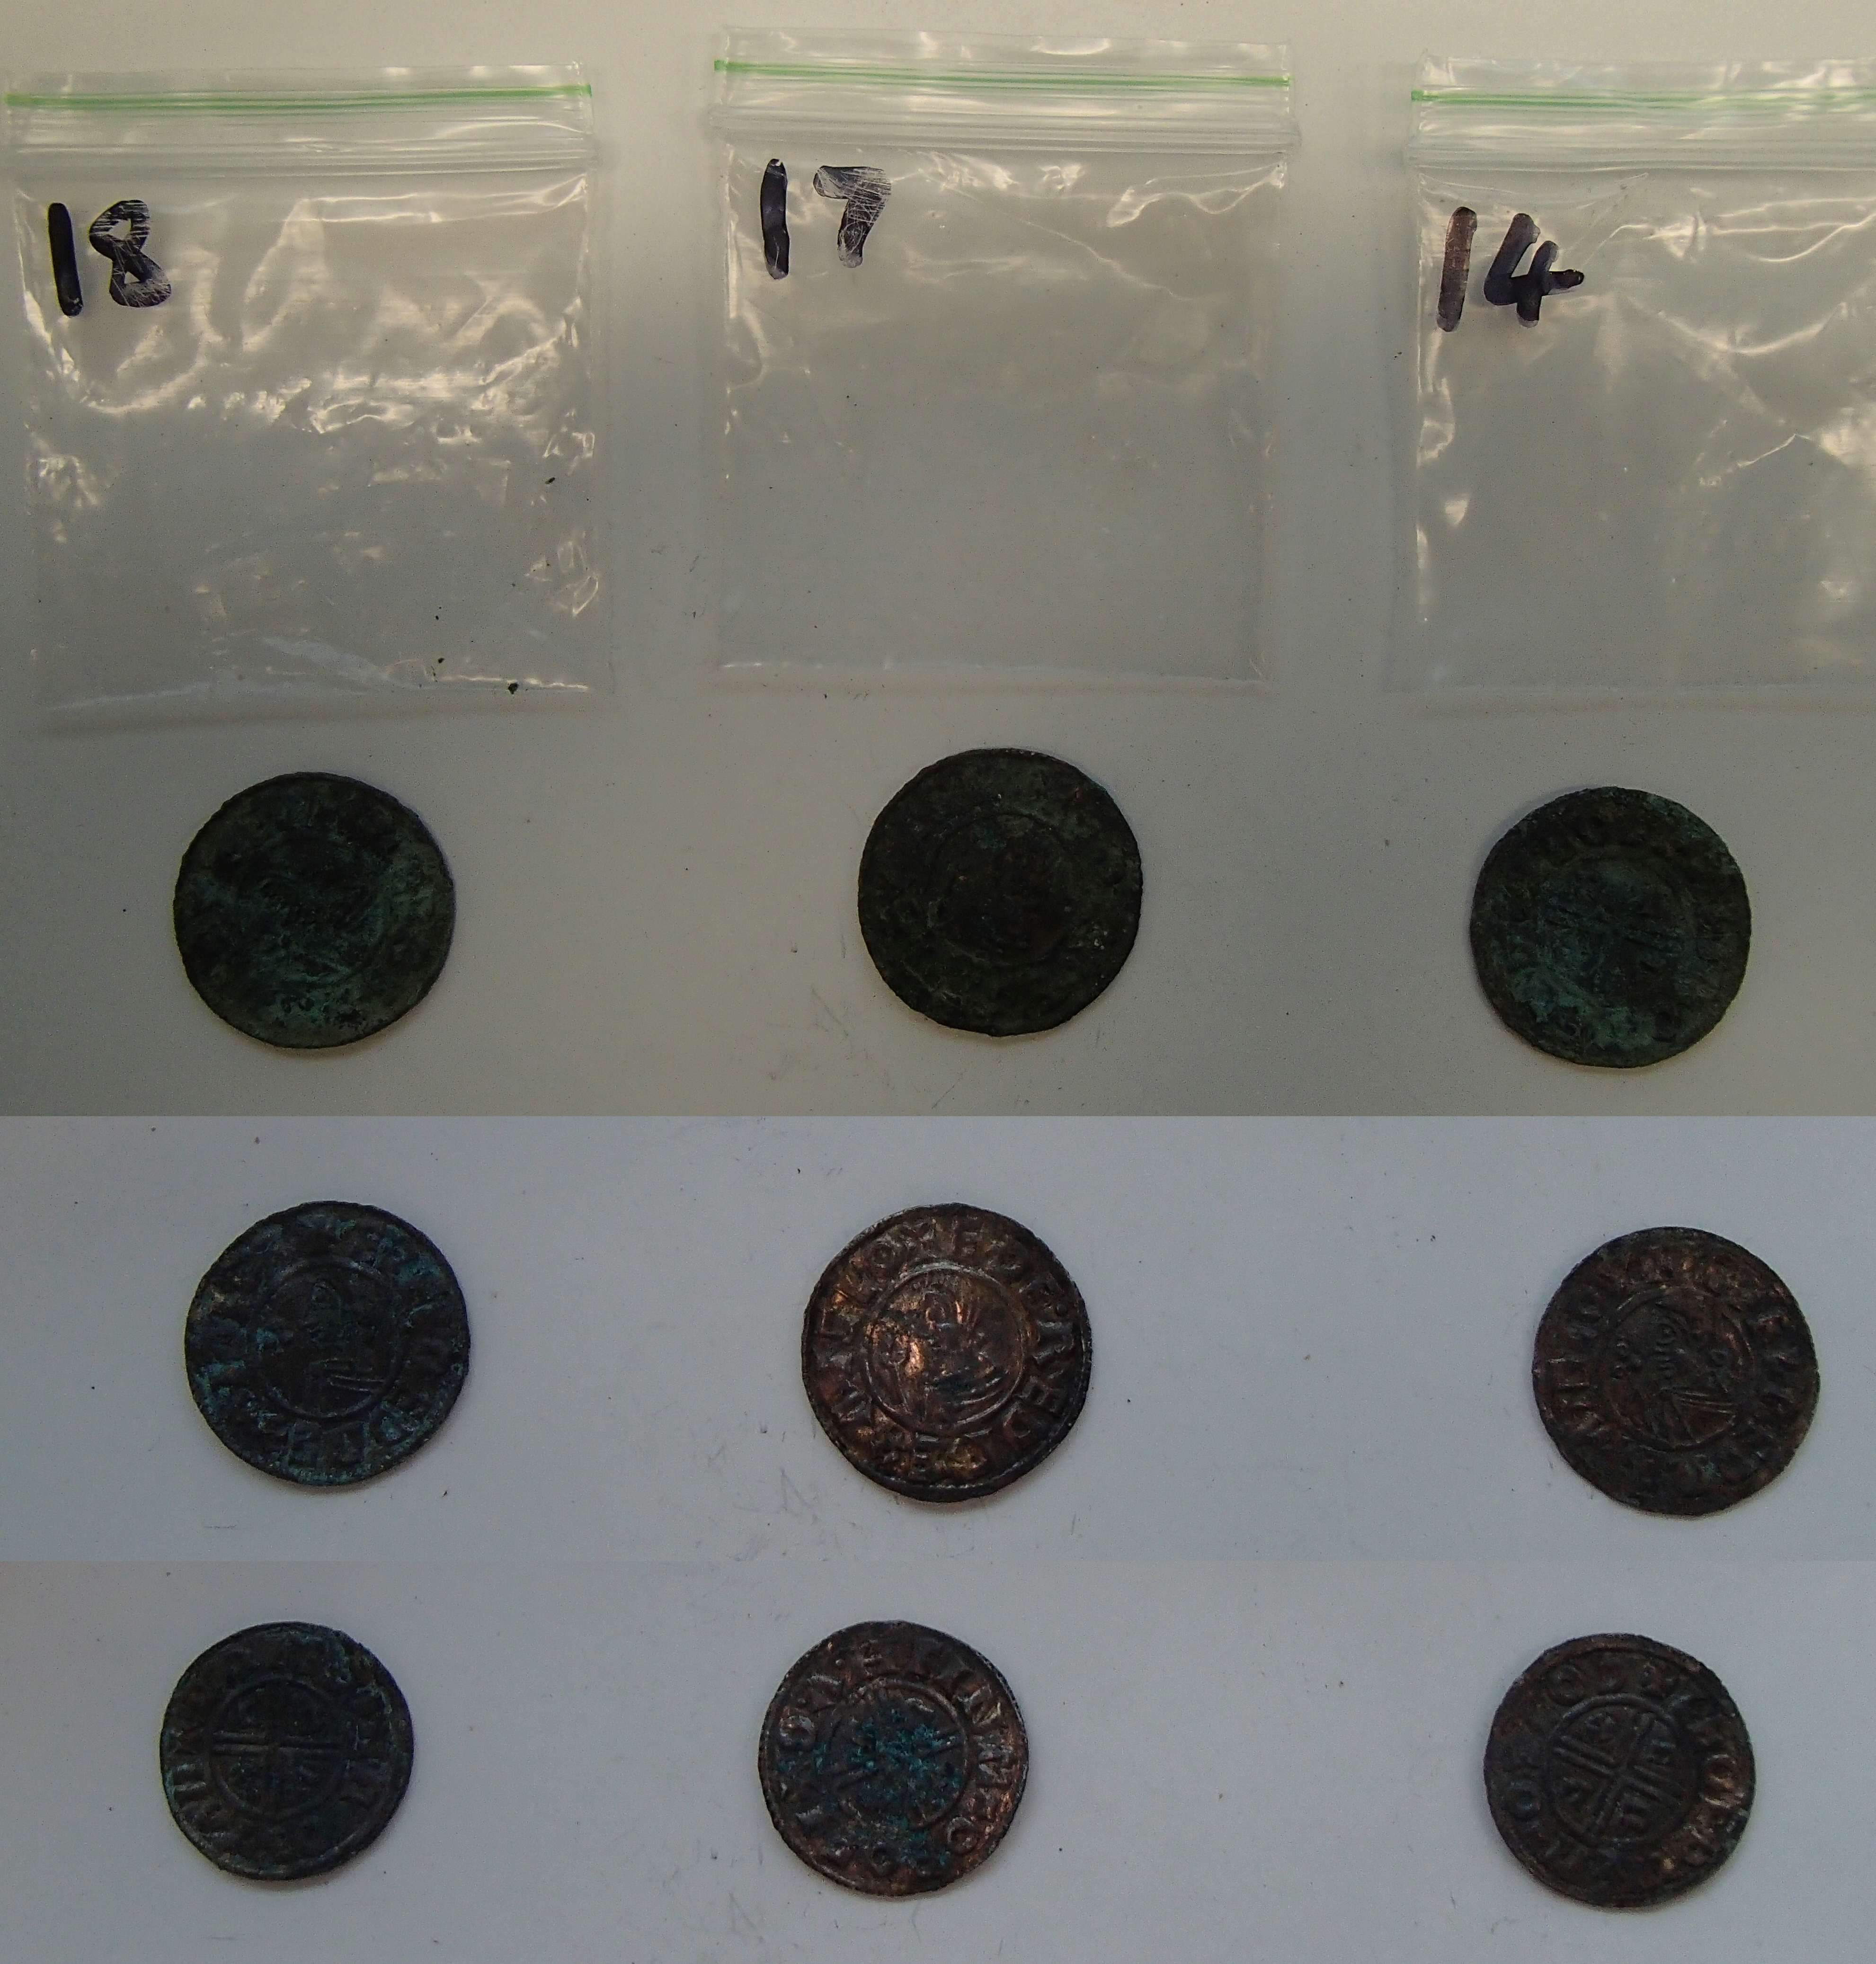 File:Willingham St Mary 2017T319. Picture shows 3 coins before cleaning (top row). No.18 was